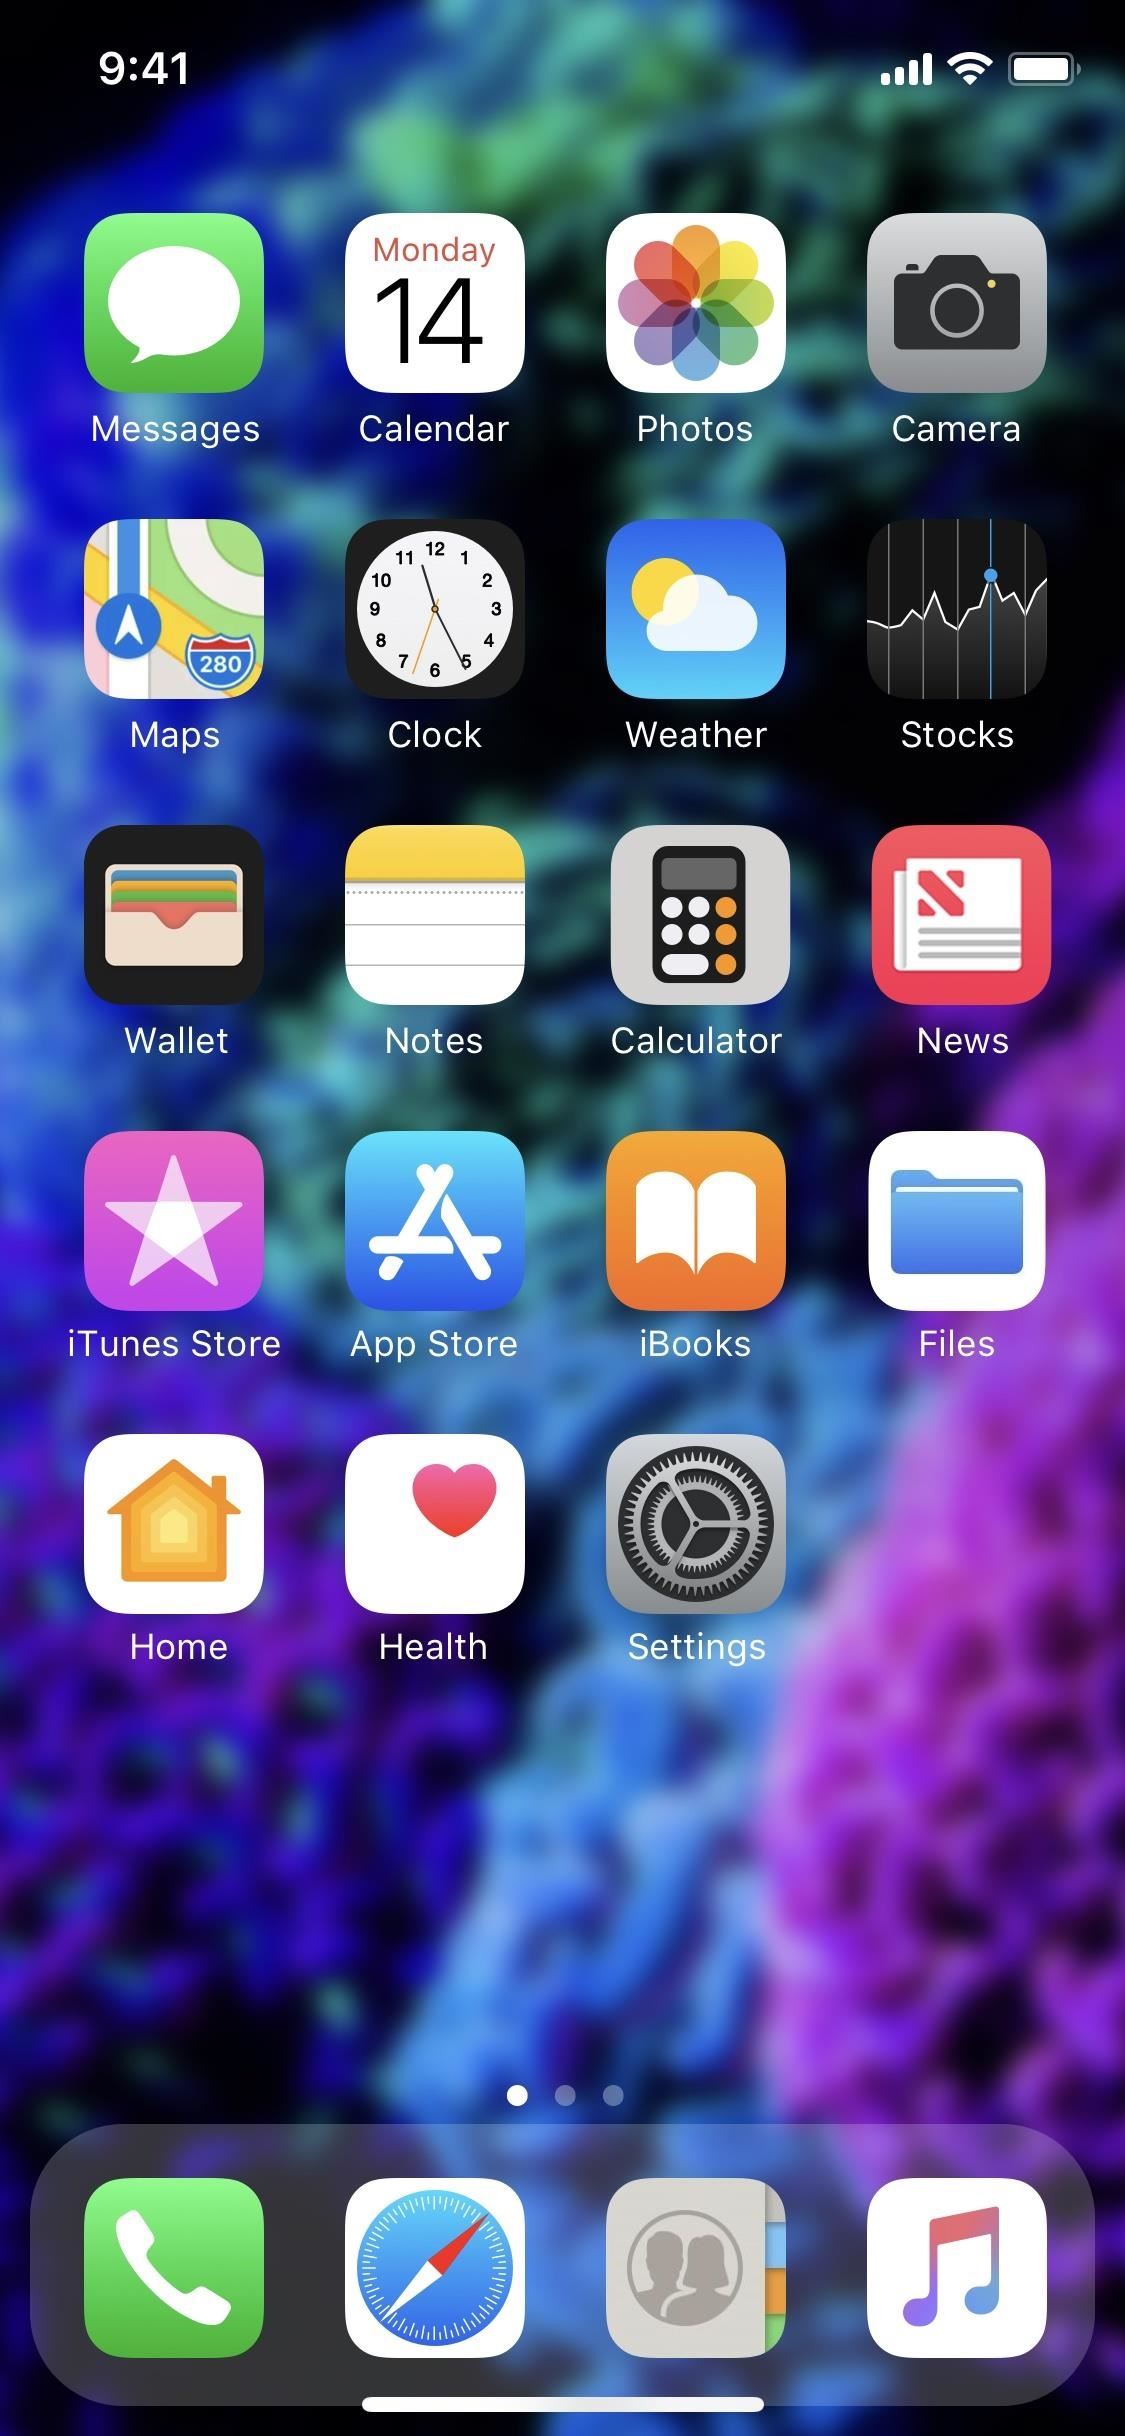 Top 5 Free Wallpaper Apps for Your iPhone « iOS & iPhone :: Gadget Hacks